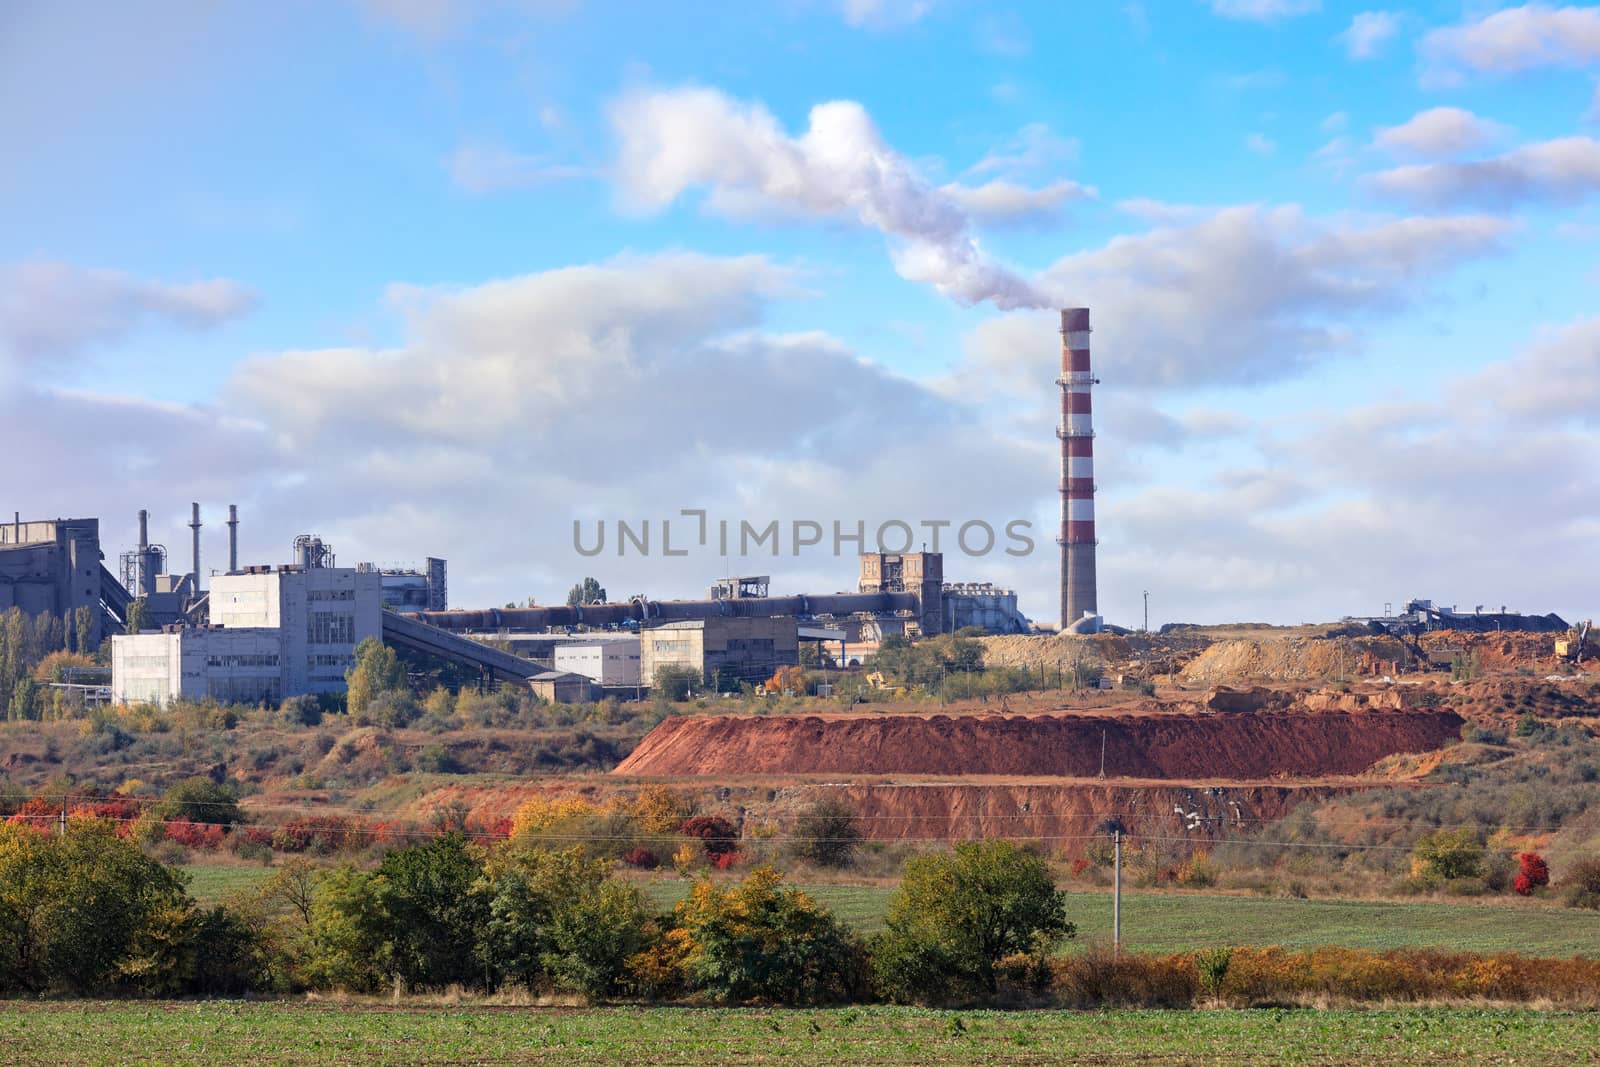 The pipe of the cement plant rises above the quarry of clay and limestone against the background of a slightly cloudy blue summer sky.